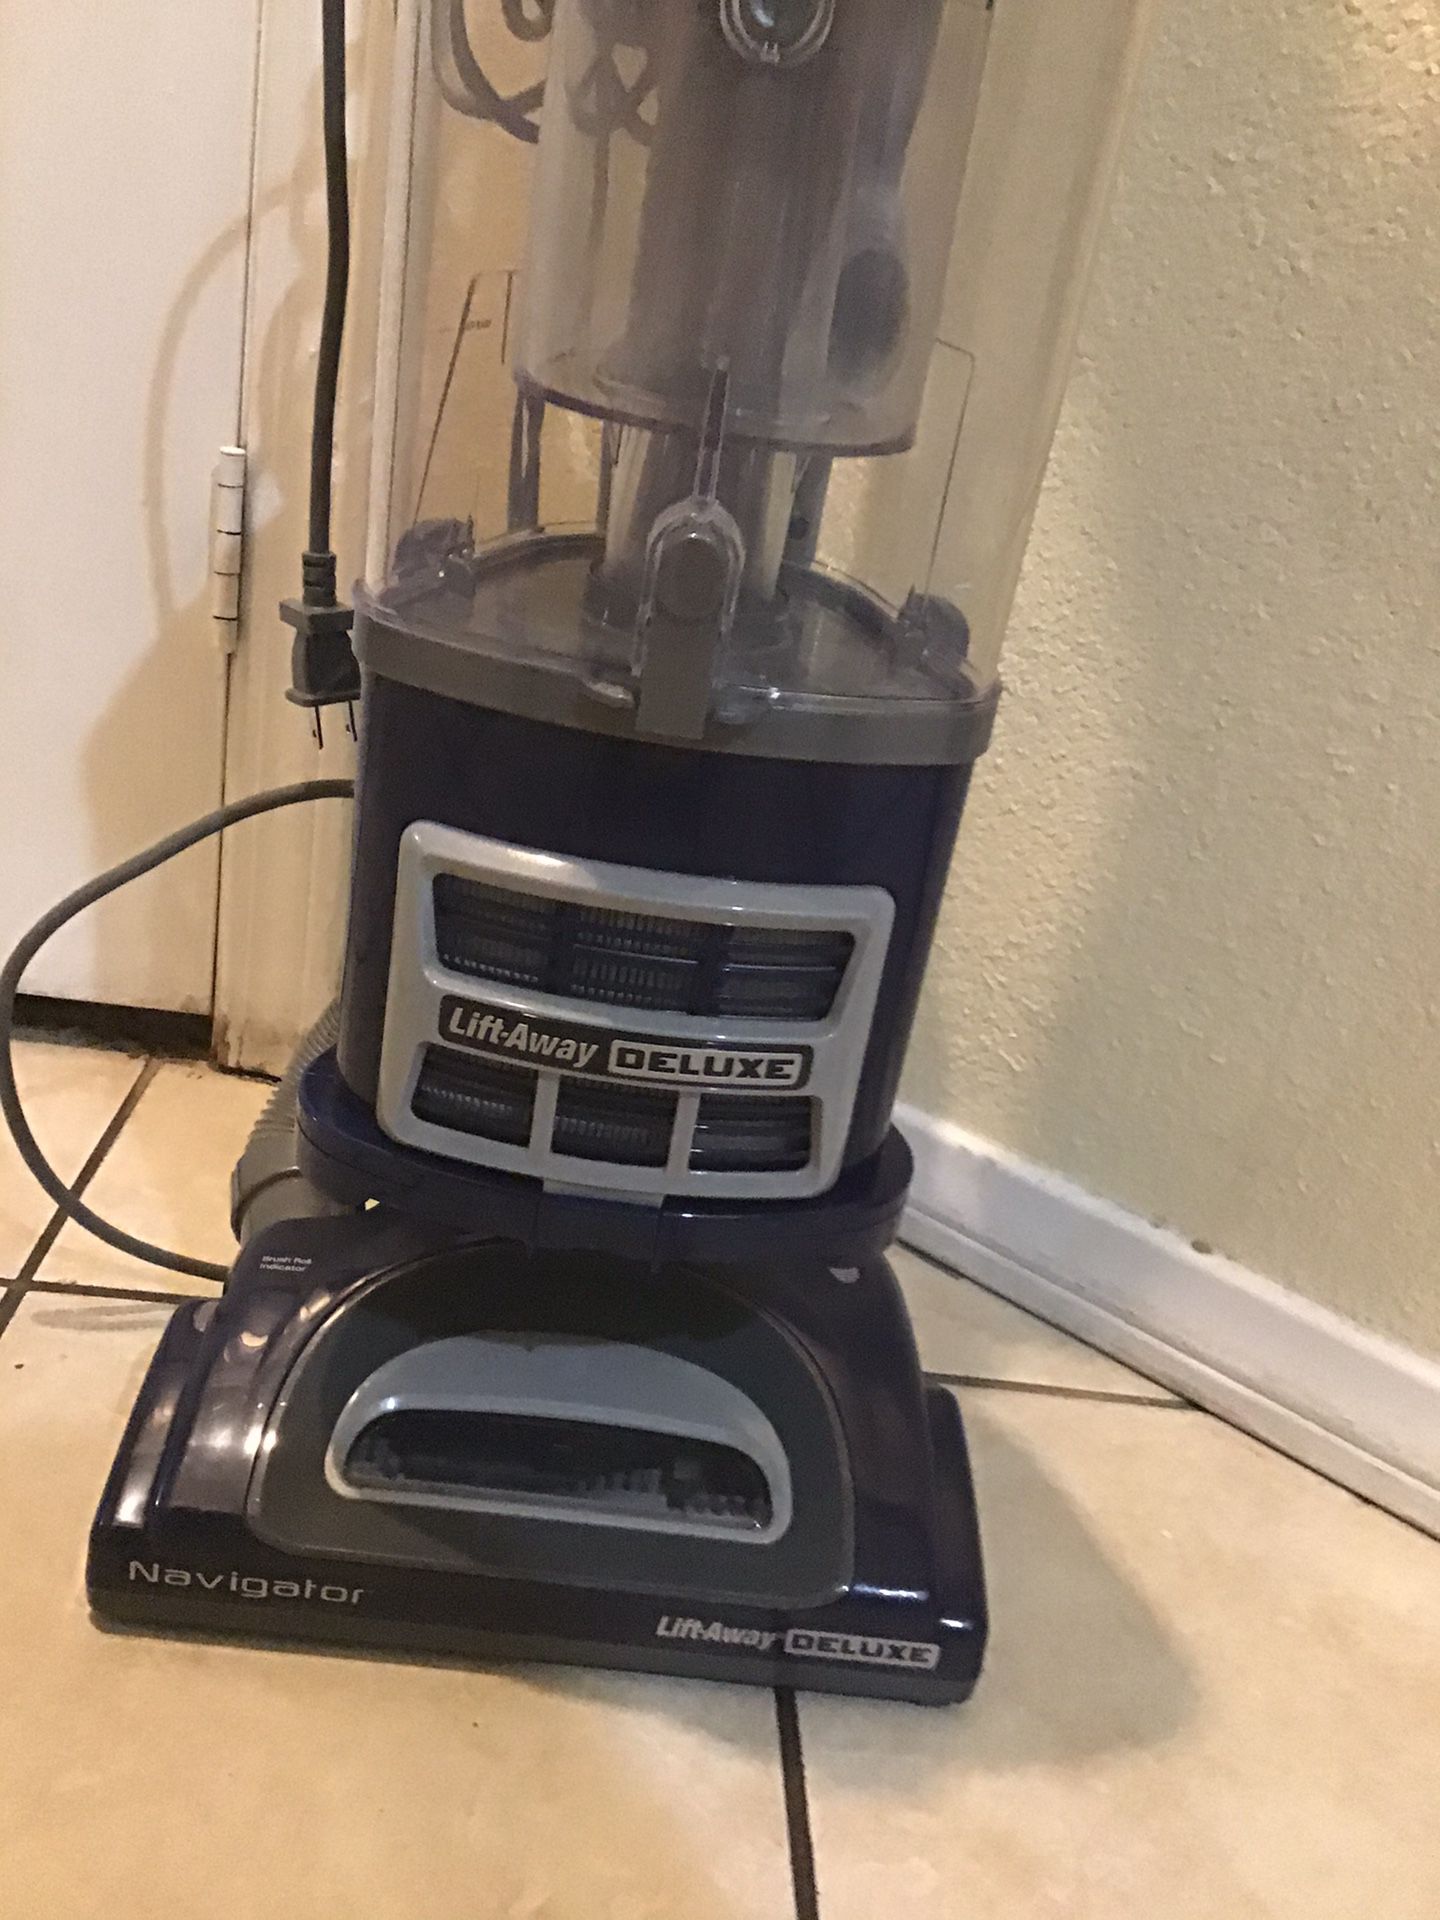 Shark lift away deluxe navigator vacuum new excellent condition open box never used with all accessories included